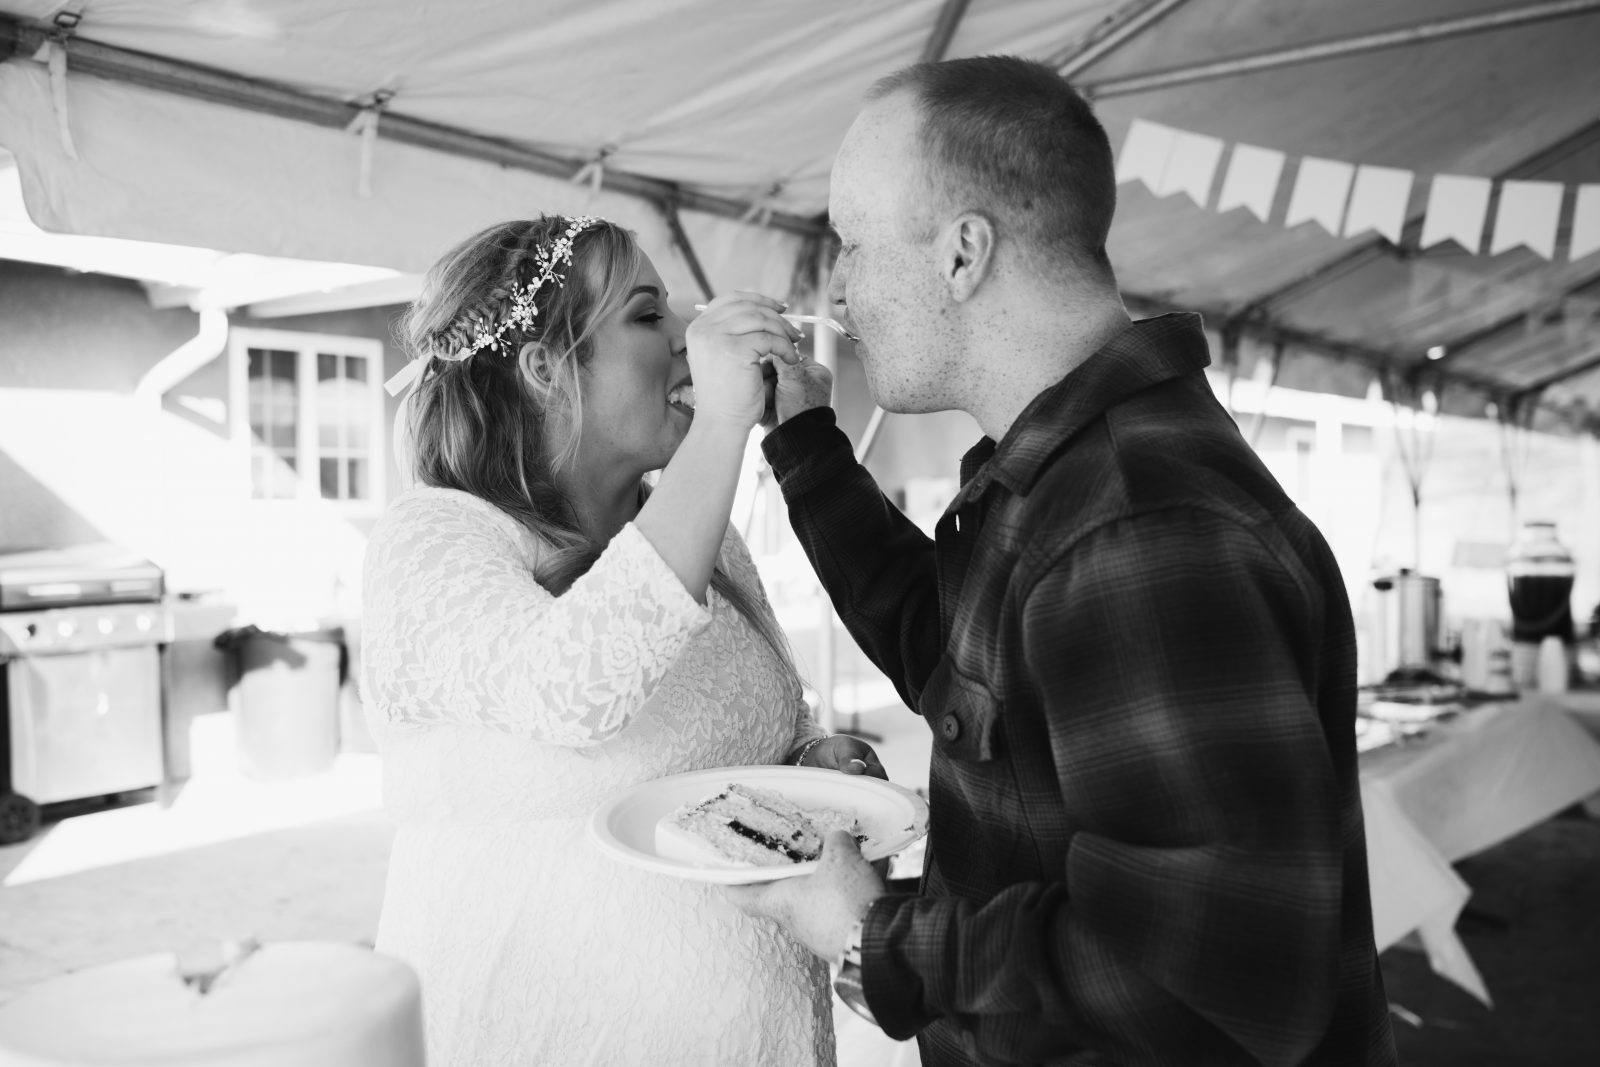 bride and groom eating wedding cake at a casual wedding ceremony